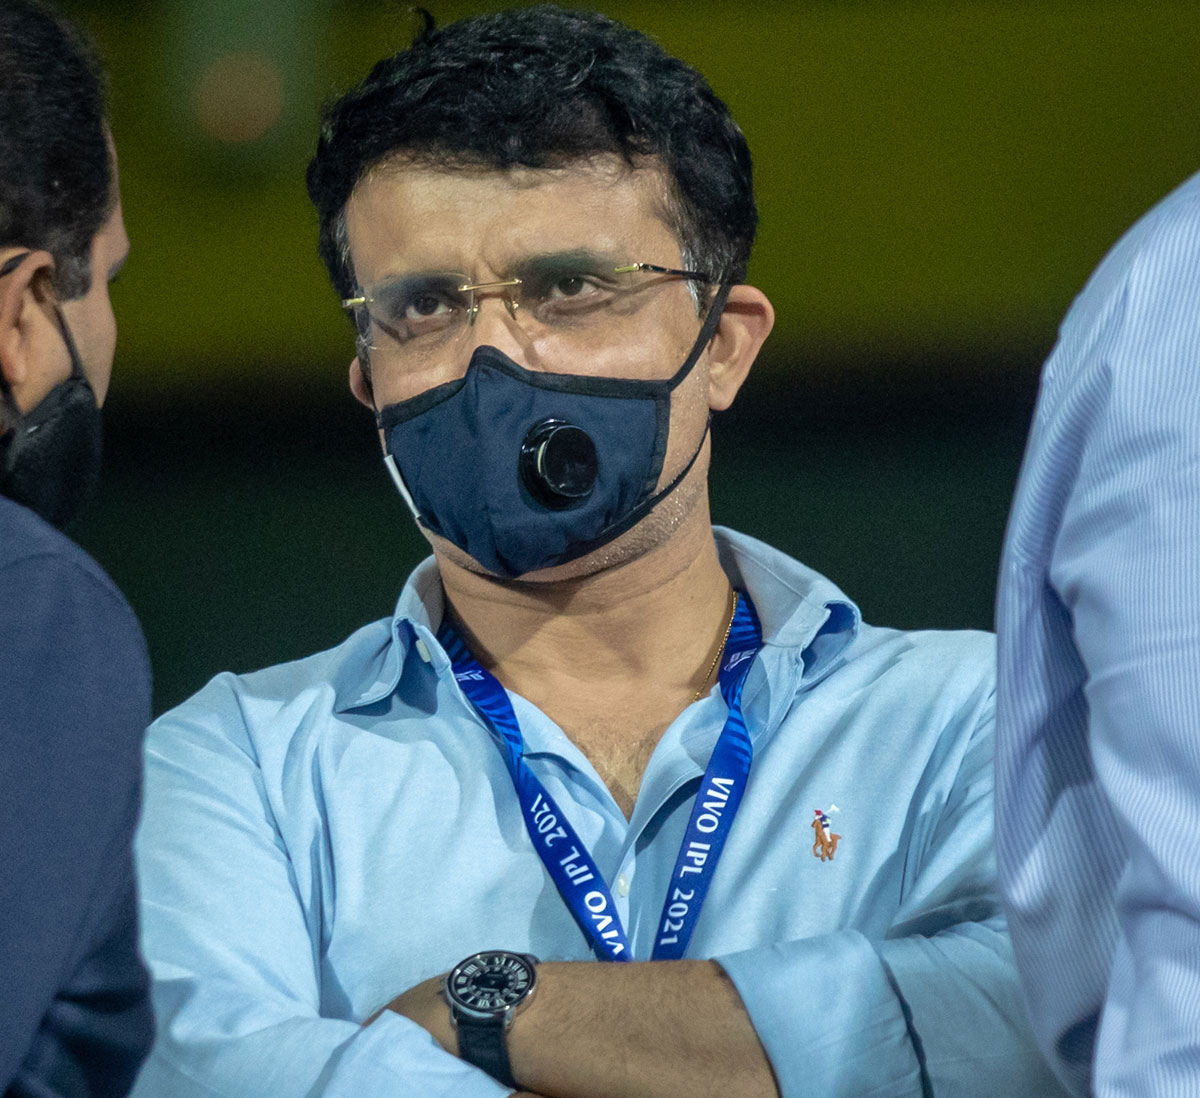 Remaining IPL games can't be played in India: Ganguly